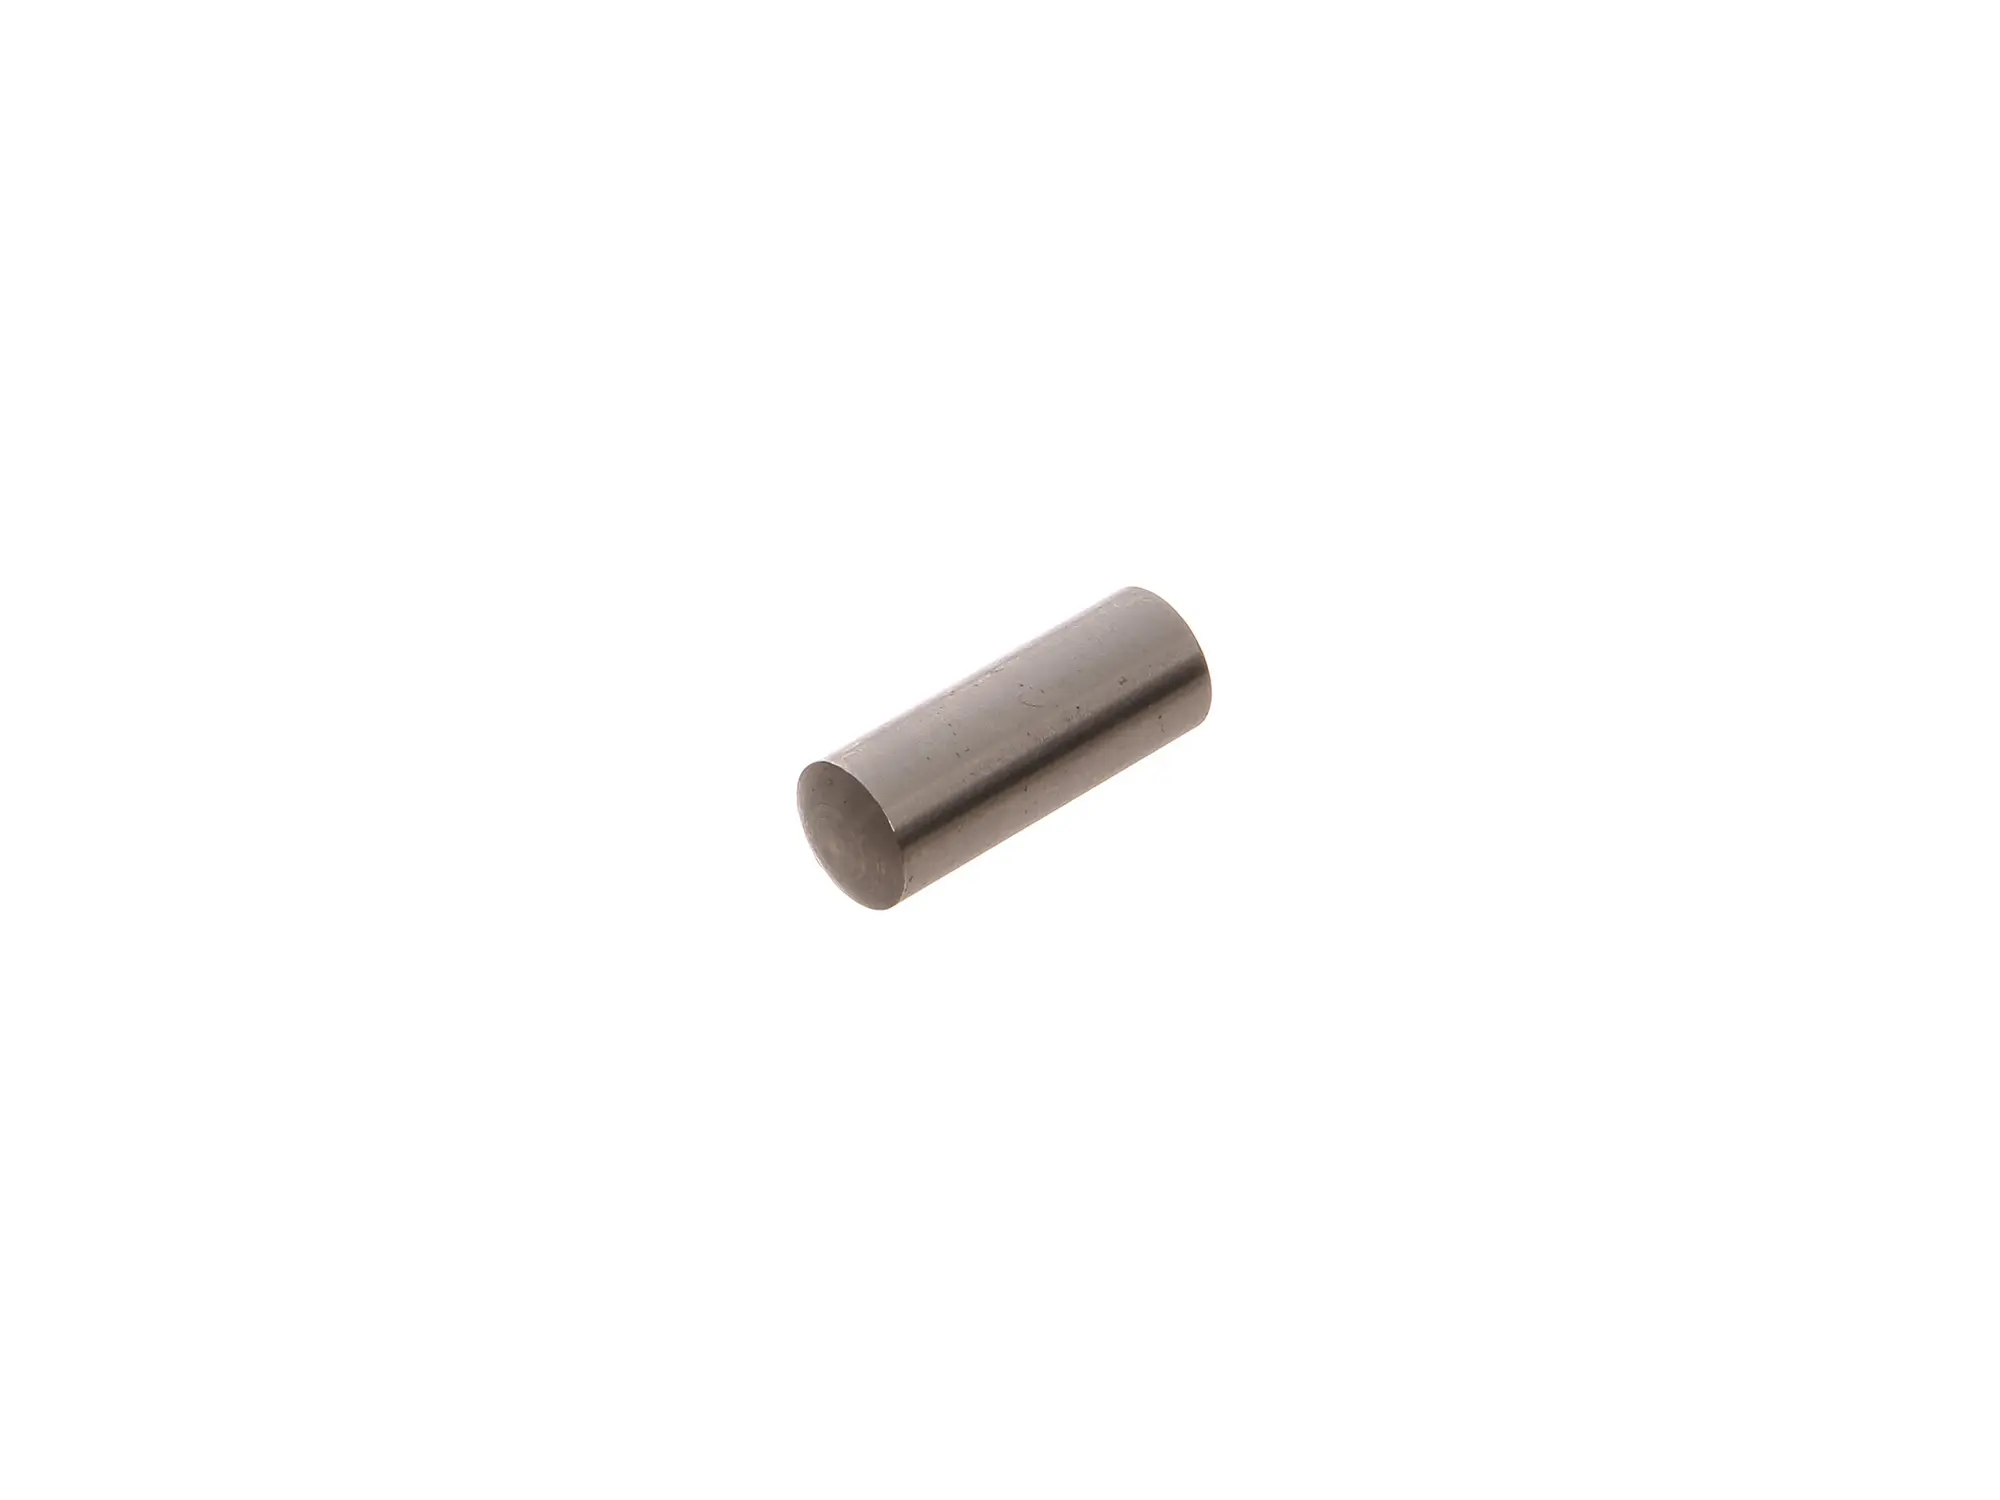 Cylindrical pin 8x20-St (DIN 7- m6), Item no: 10065095 - Image 1